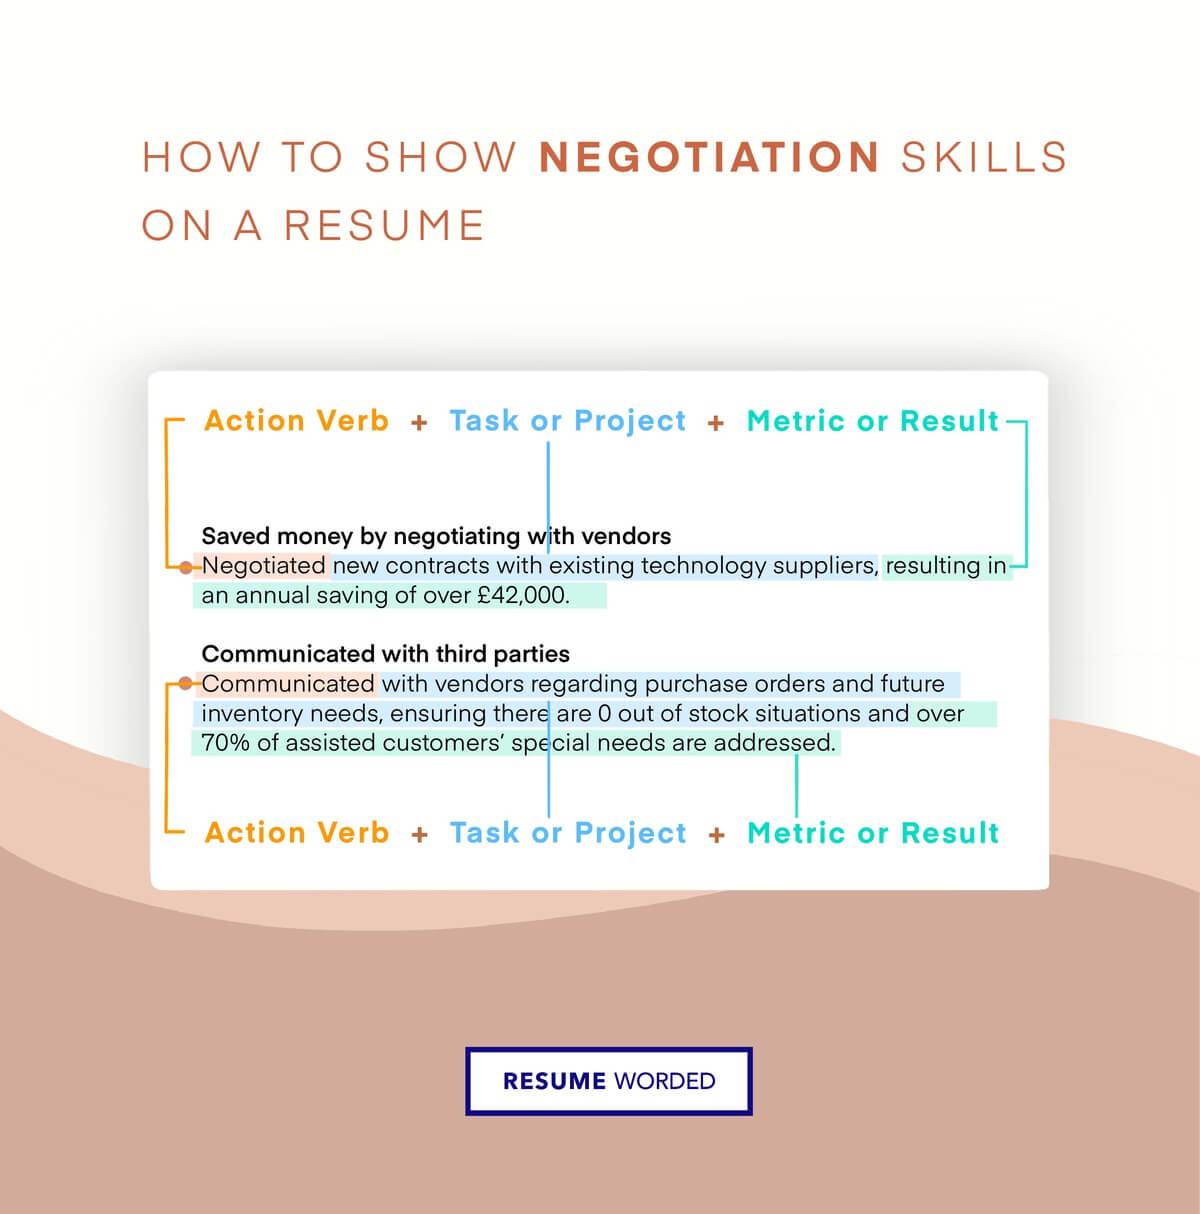 Show experience in negotiating and dealing with vendors - Benefits Manager Resume